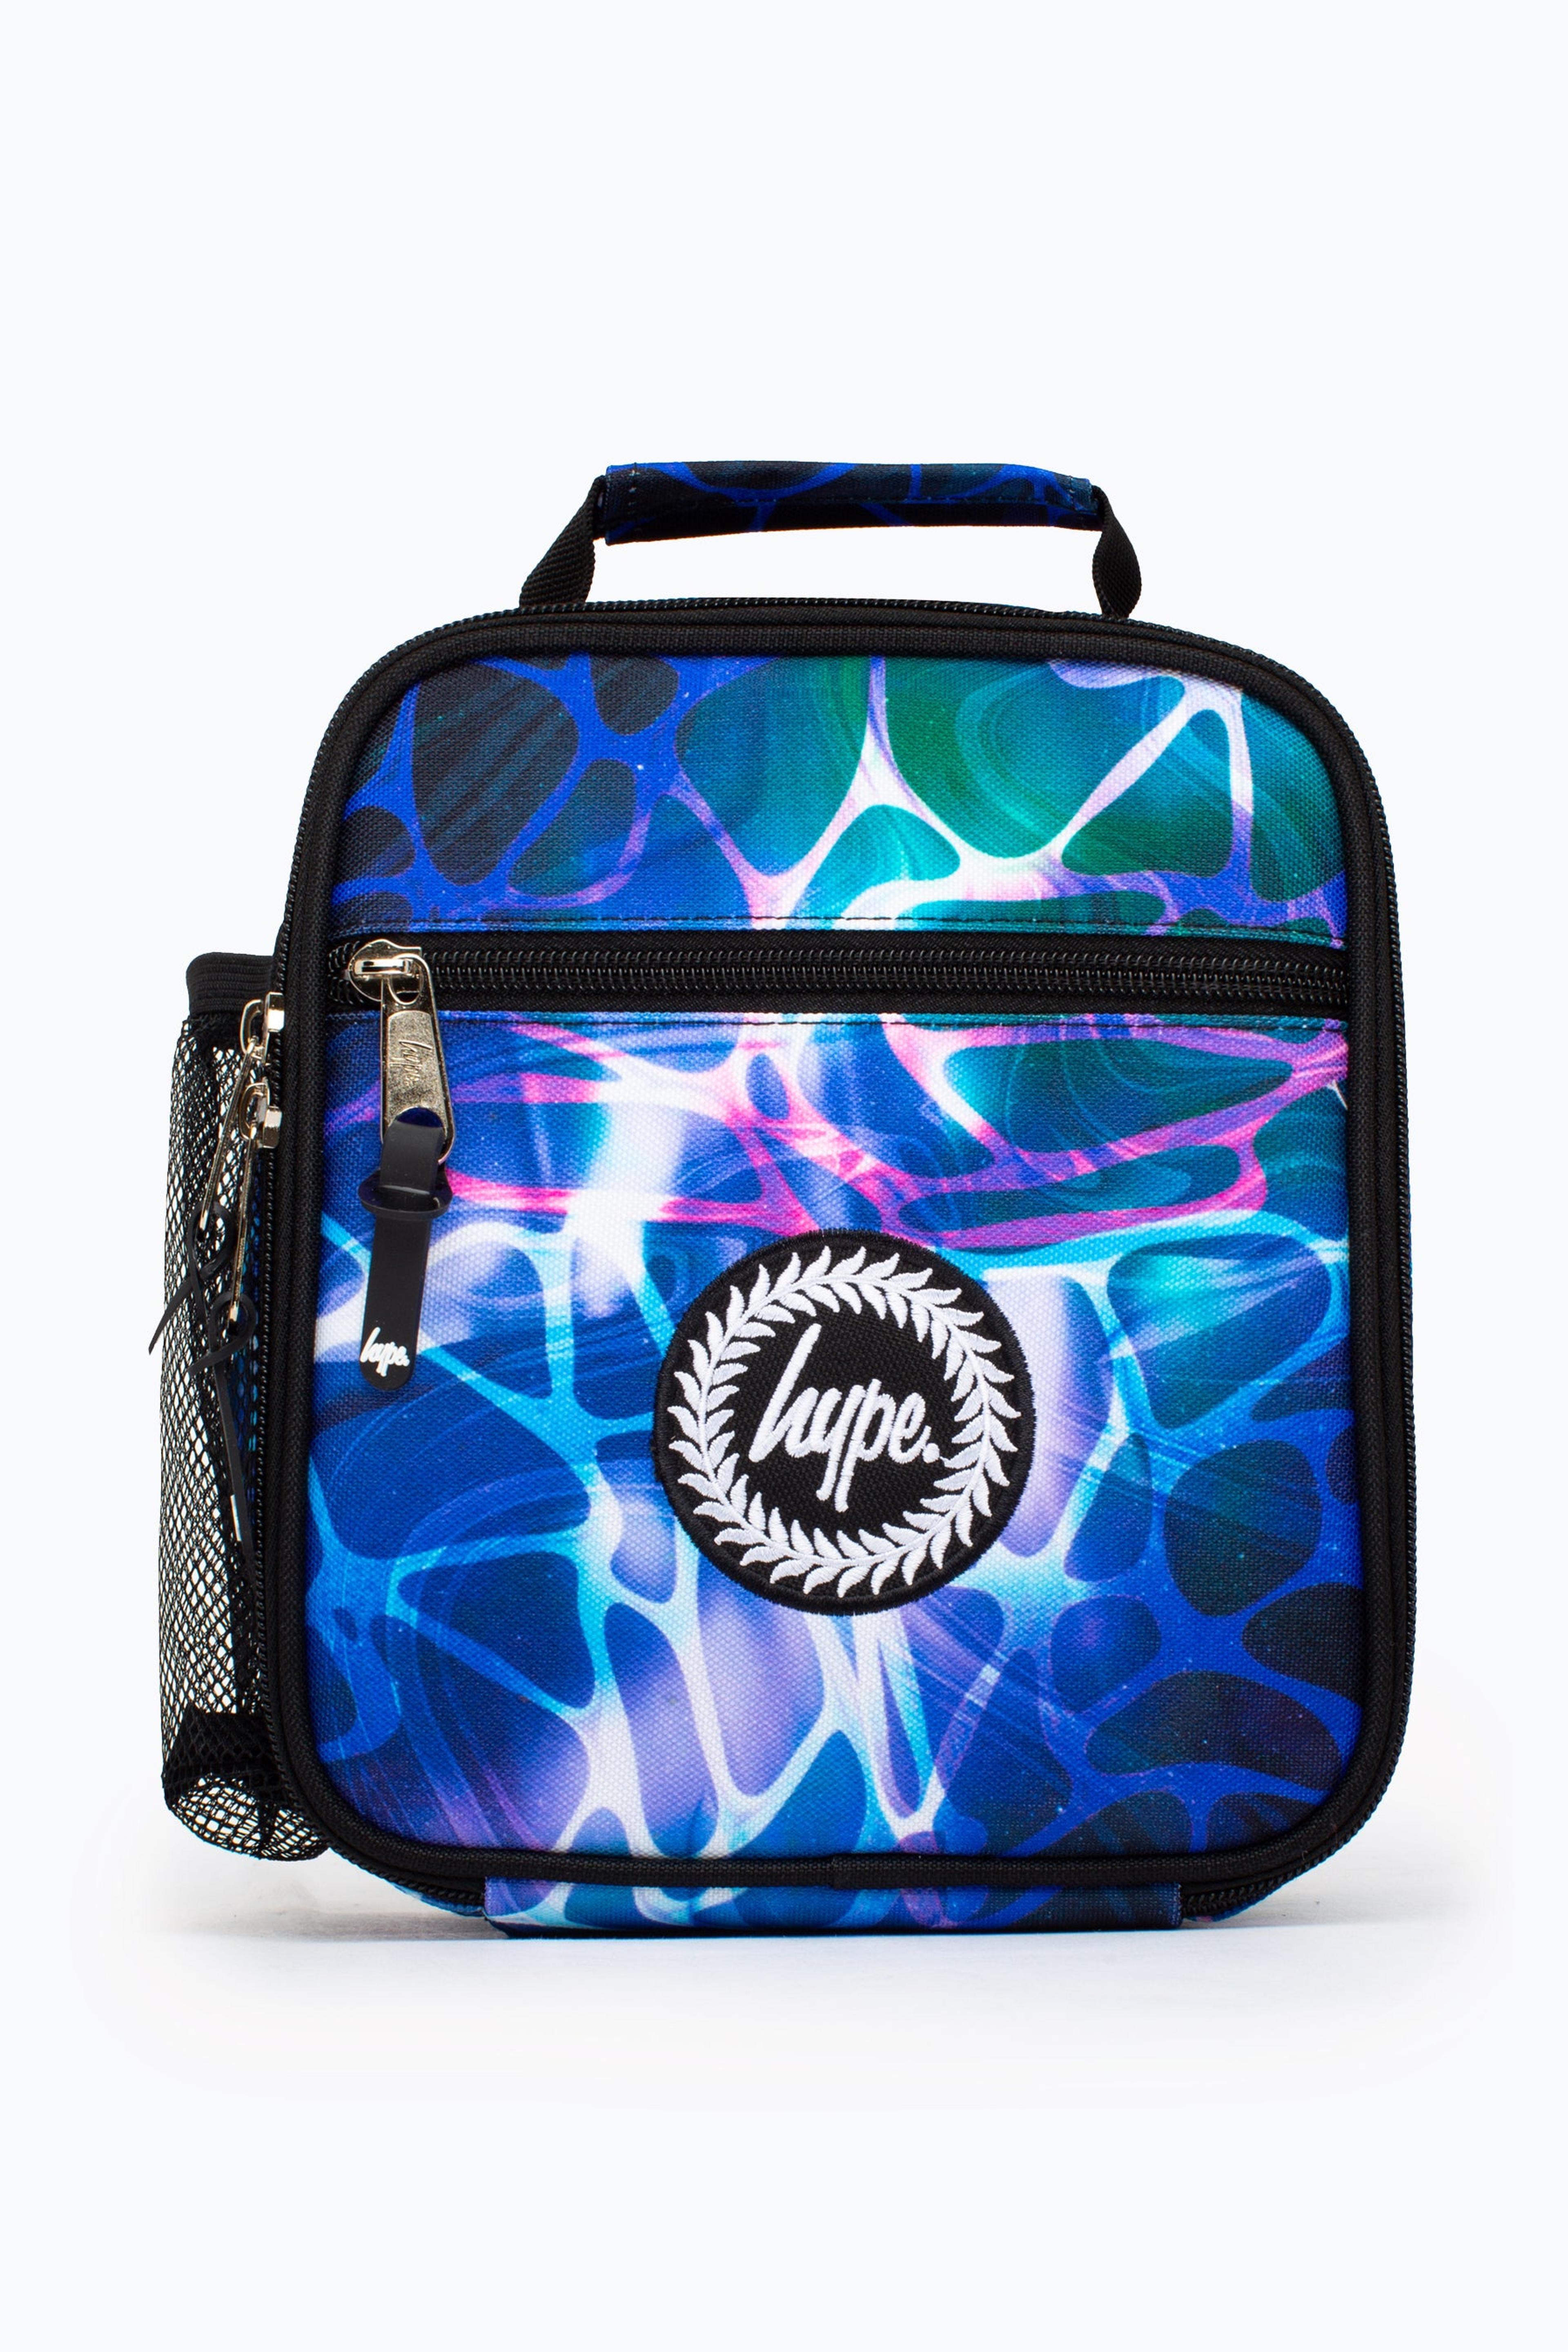 HYPE BLUE SPACE MEMBRANE LUNCH BOX